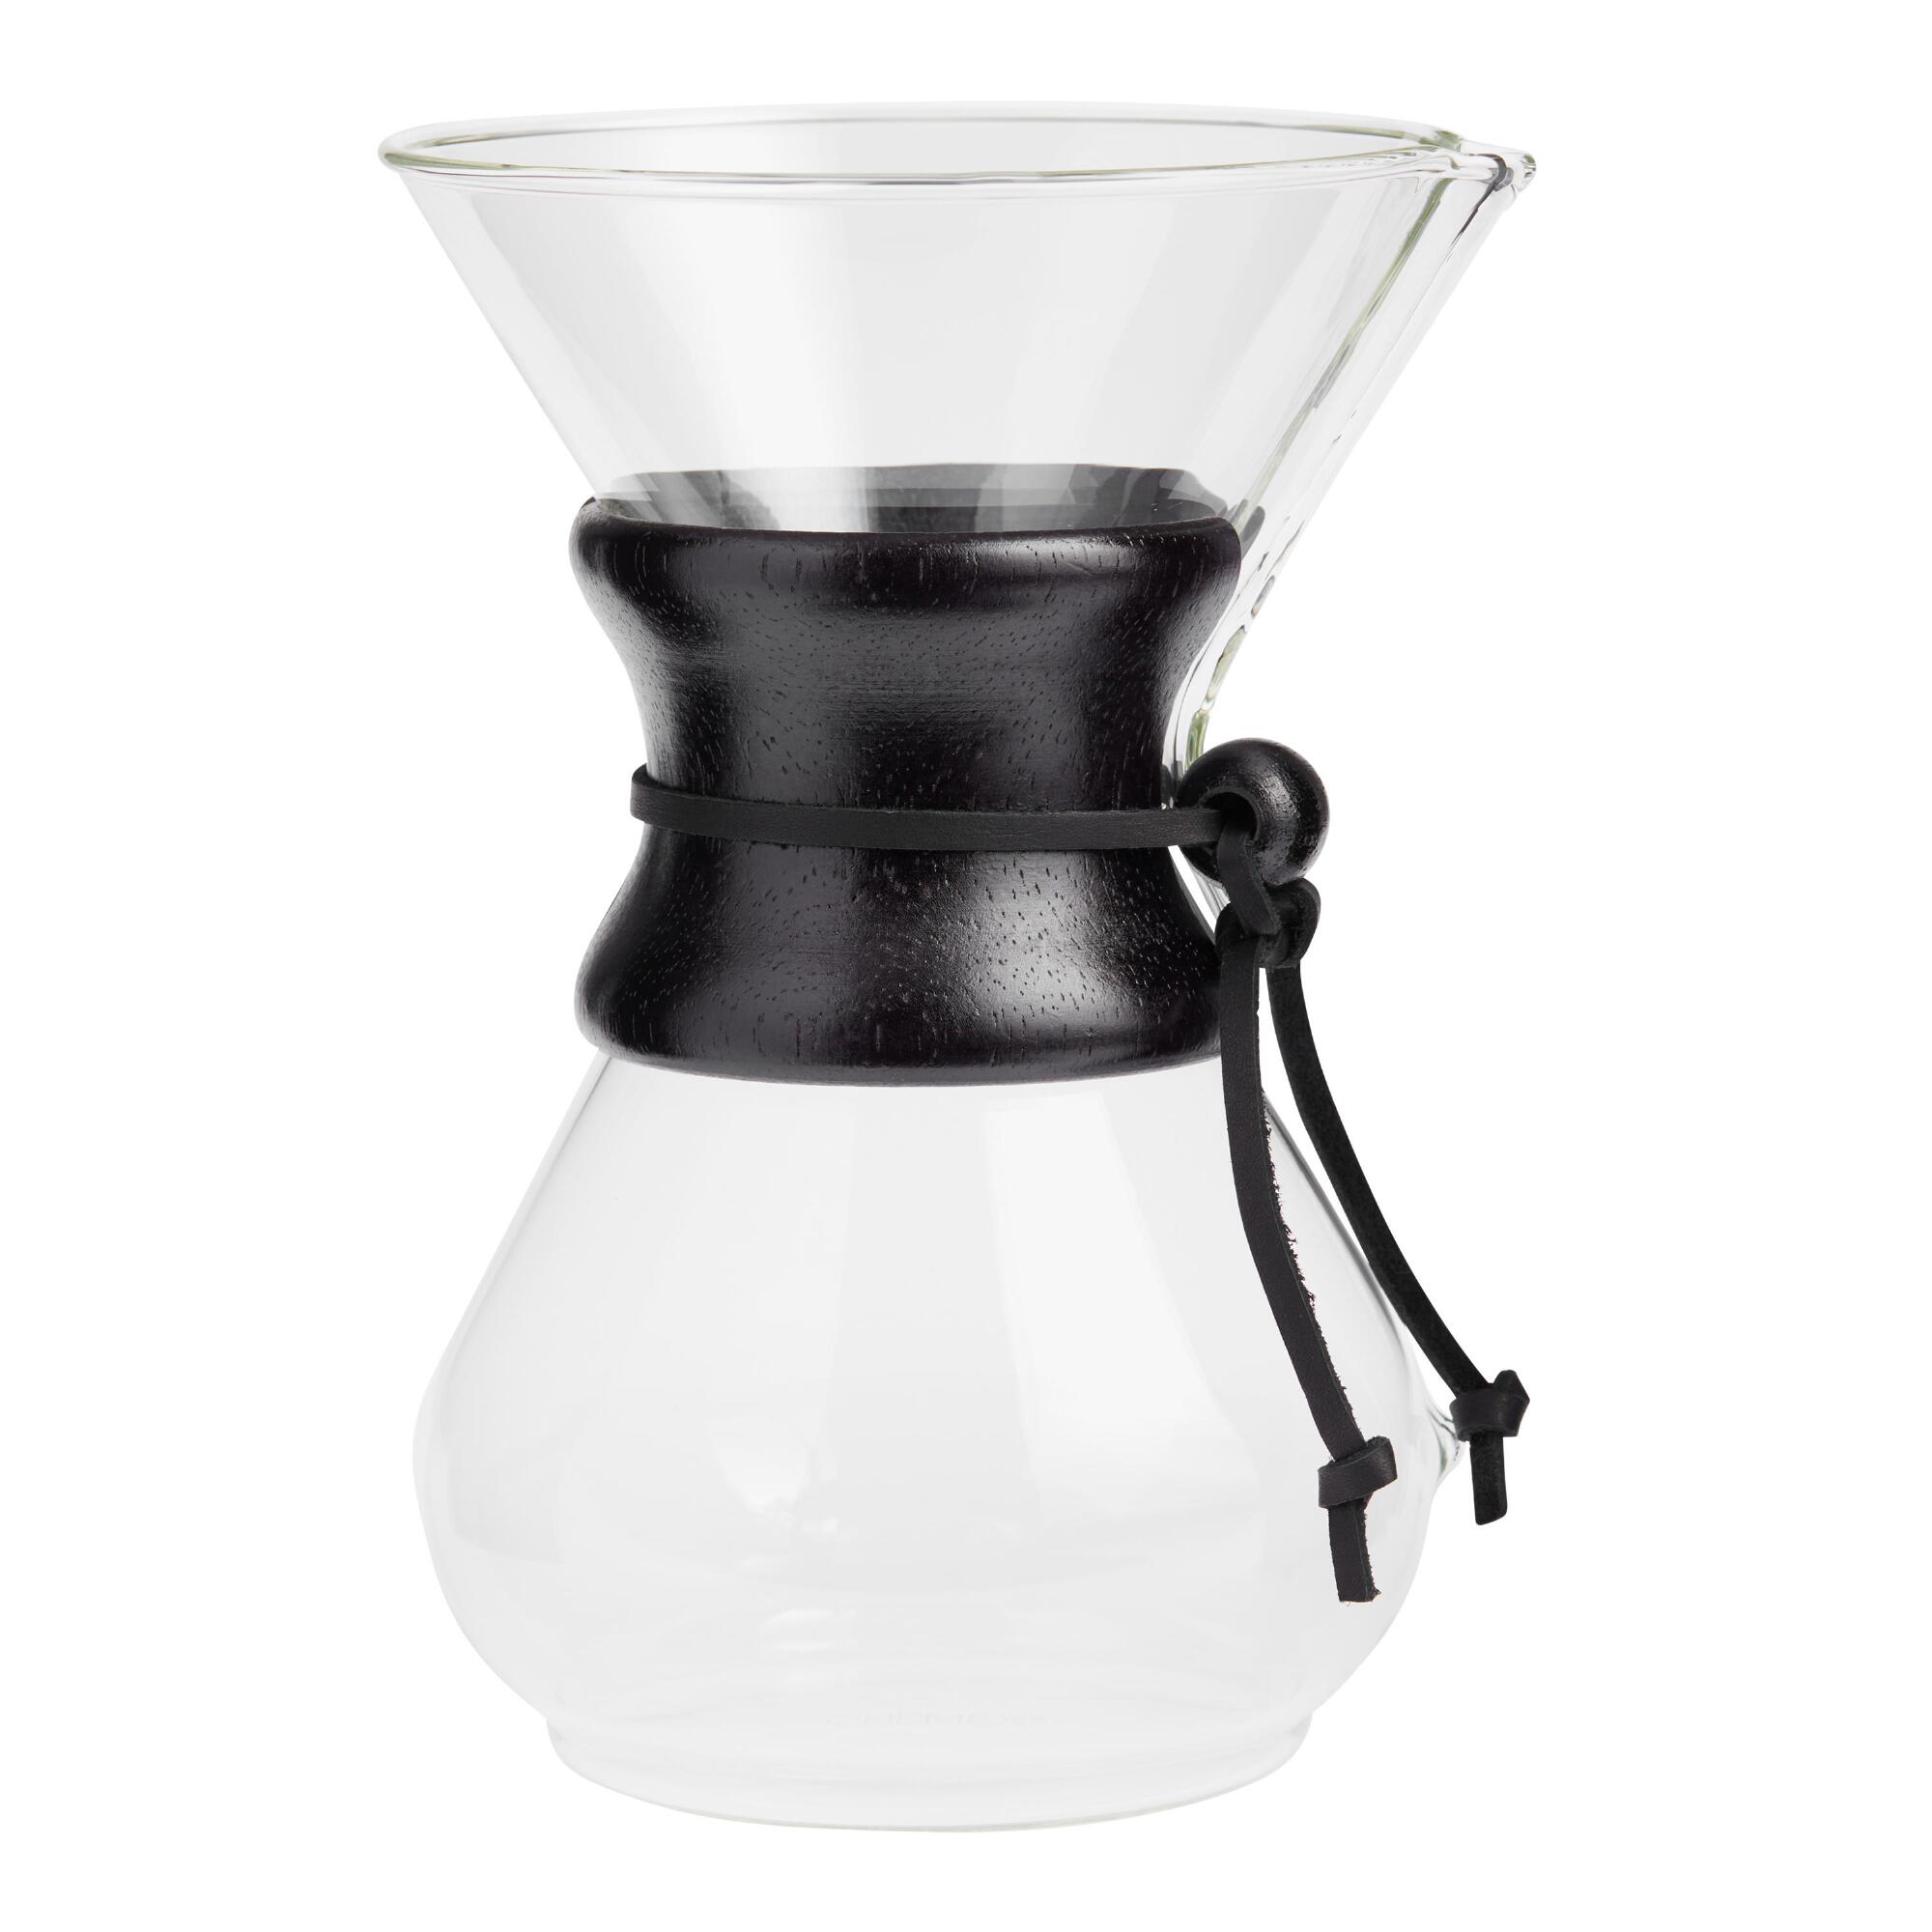 Chemex 6 Cup Glass Pour Over Coffee Maker: Black - Aluminum by World Market